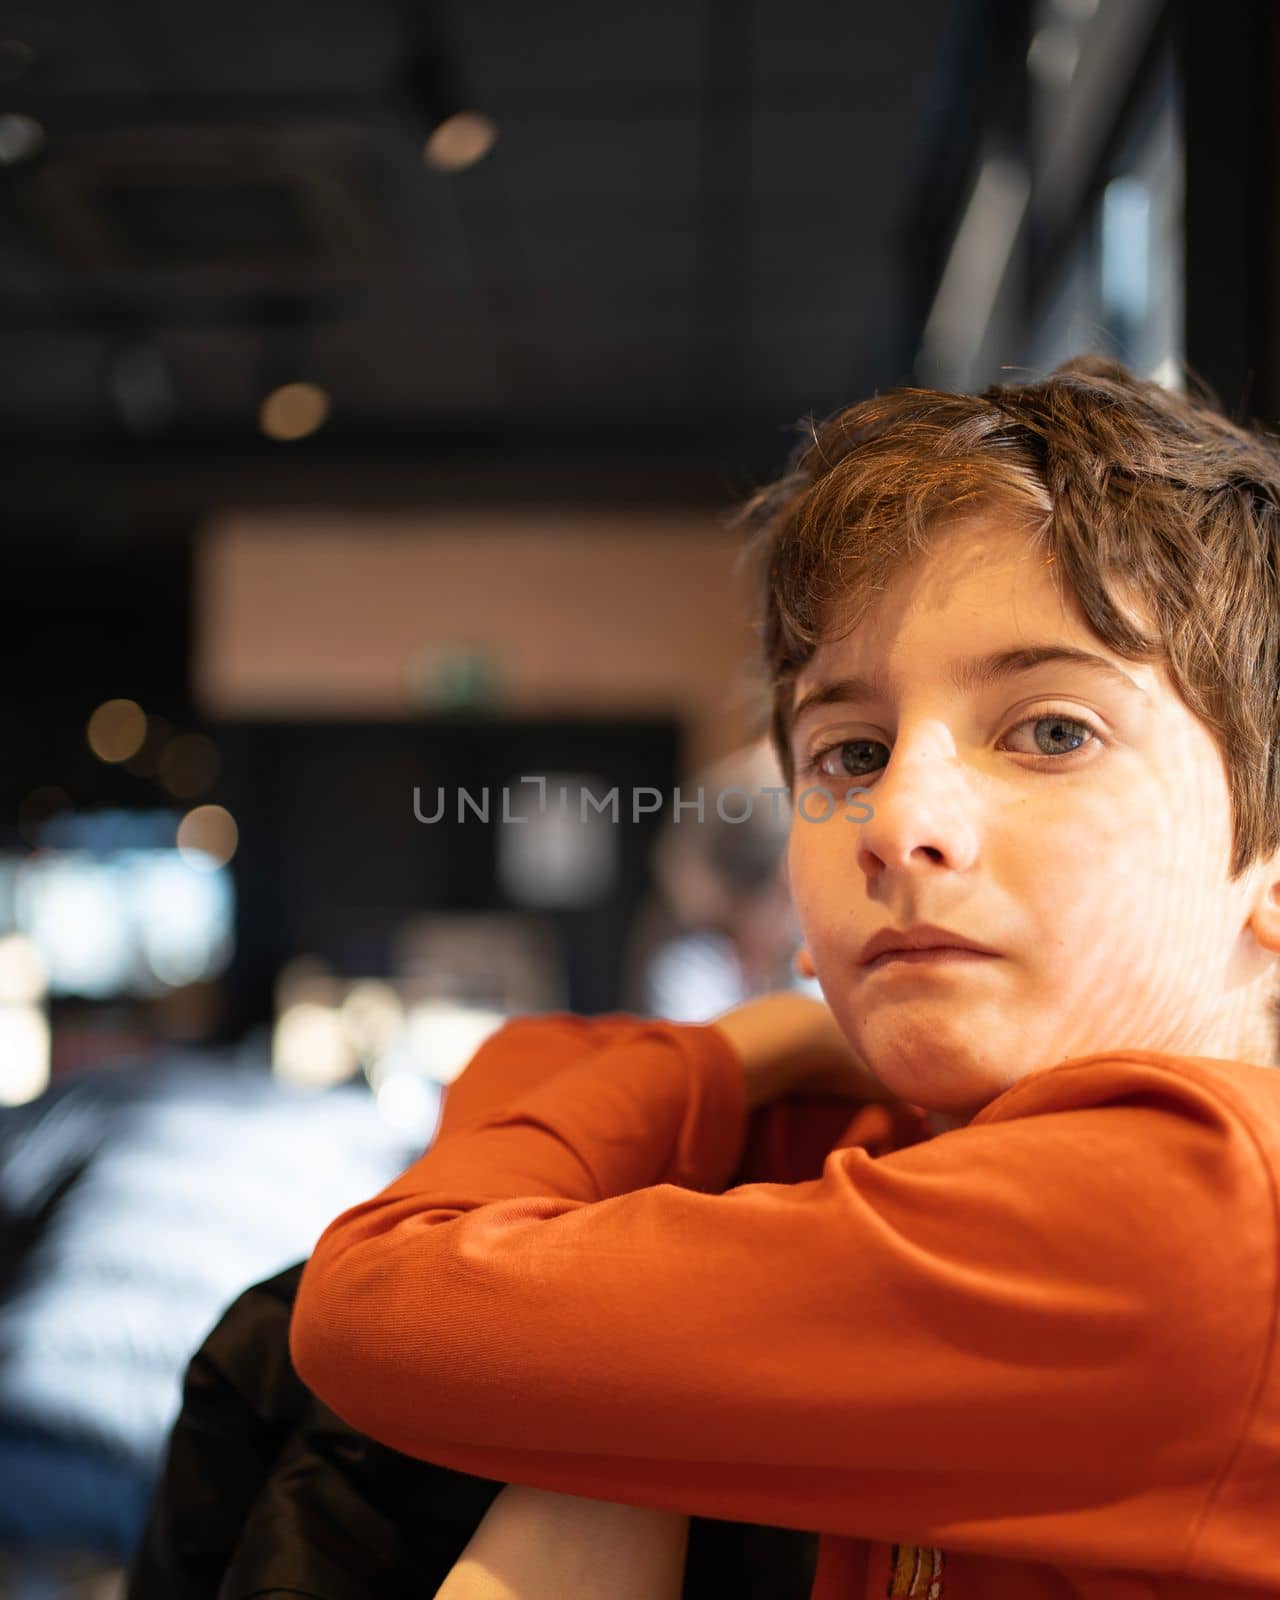 Portrait of caucasian kid with serious face expression.